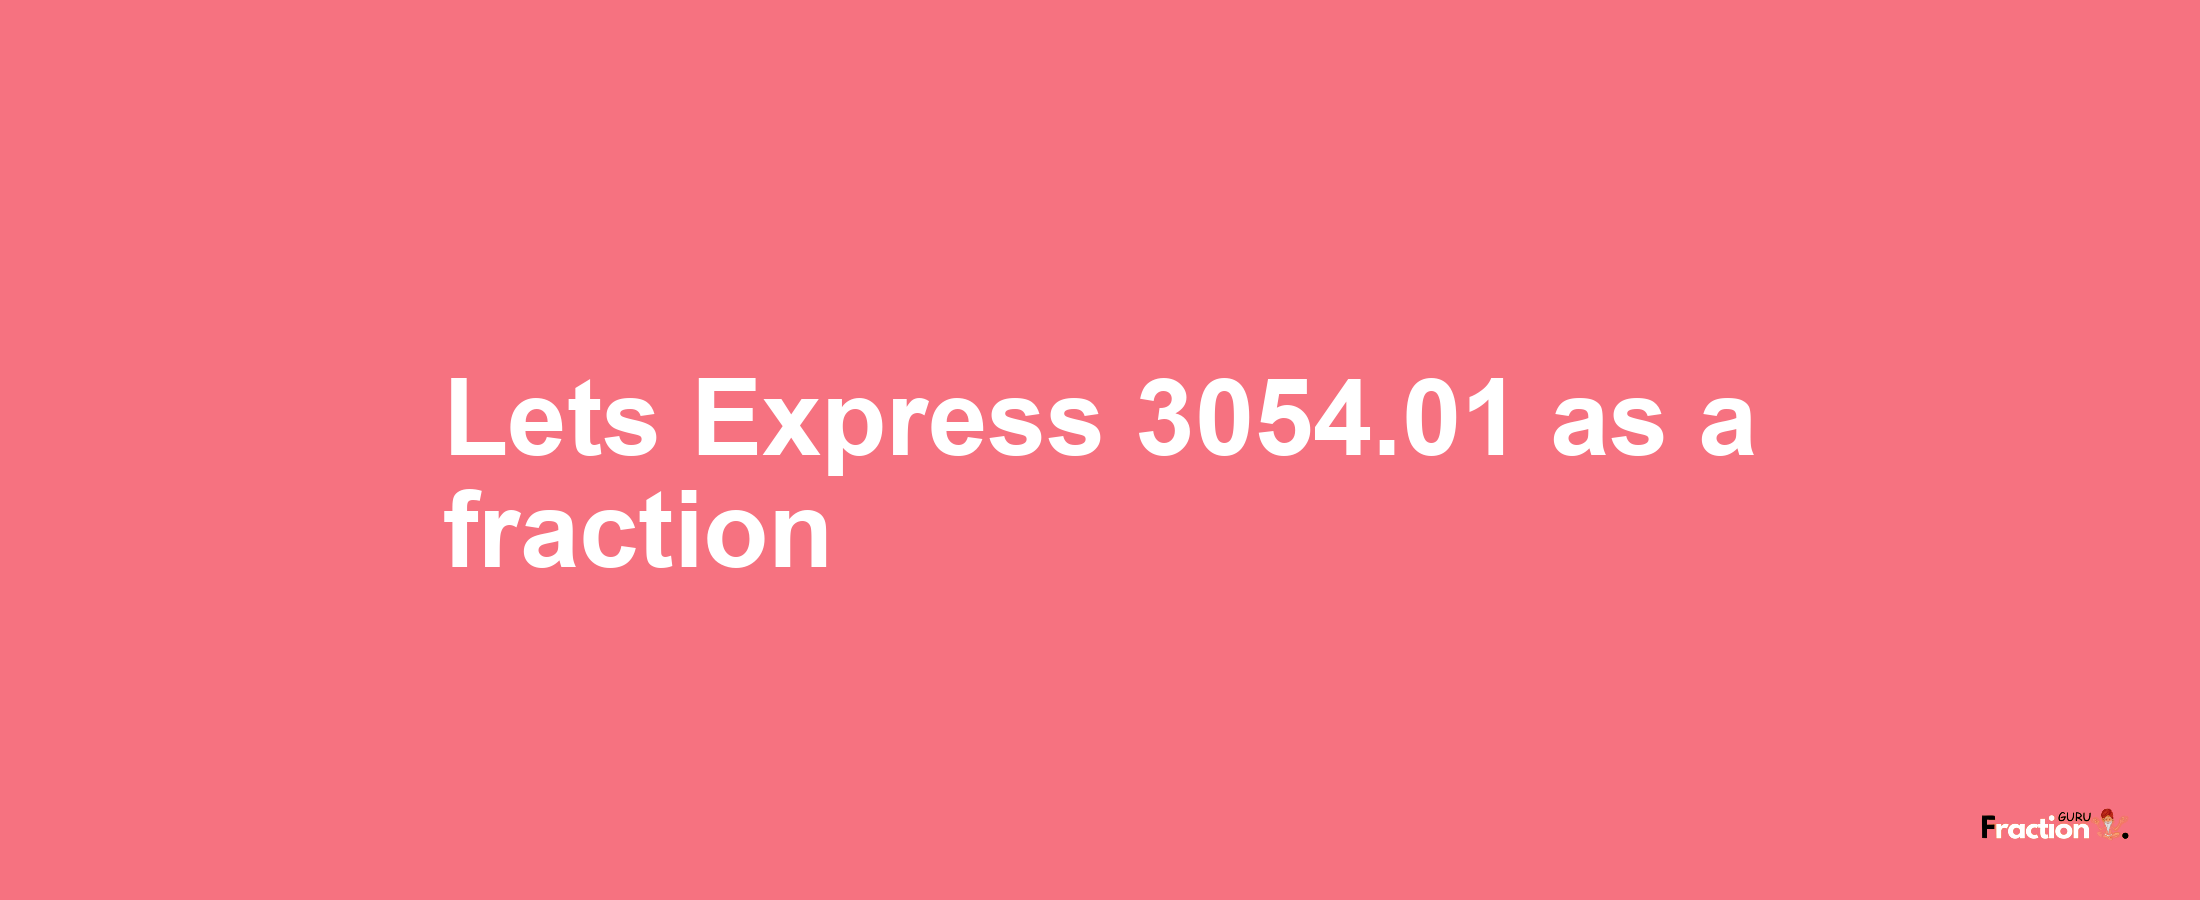 Lets Express 3054.01 as afraction